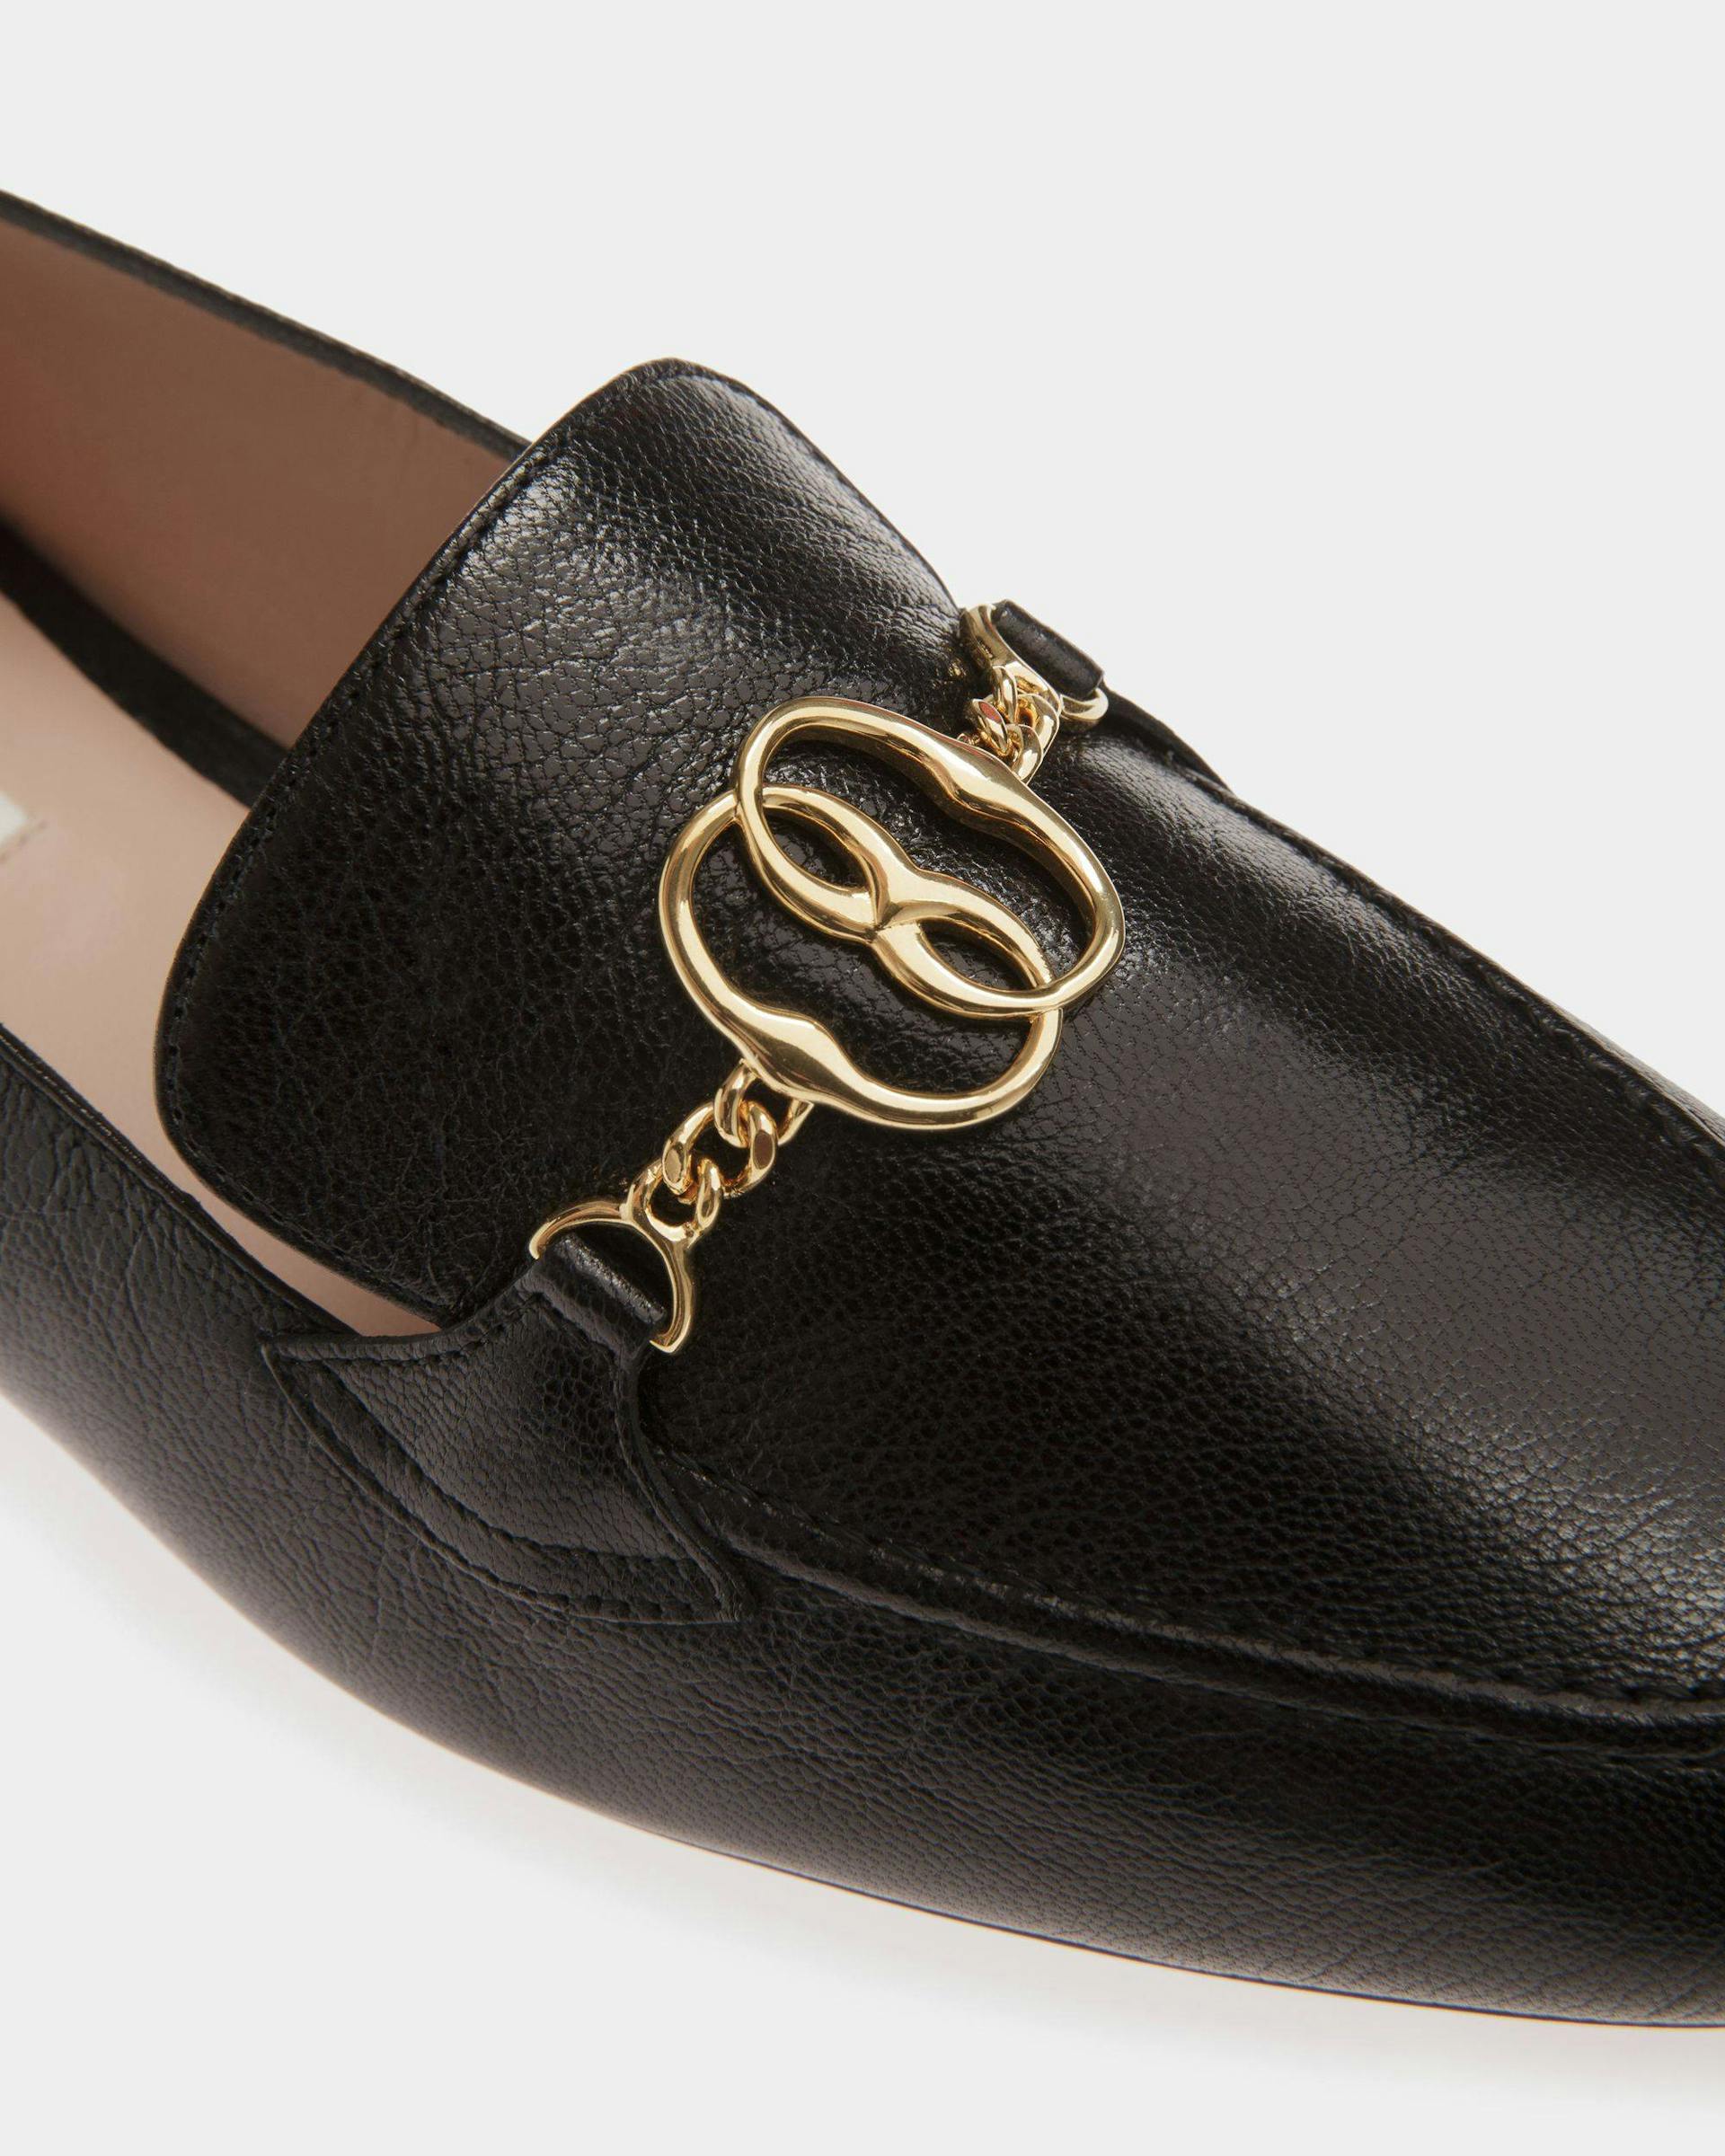 Women's Daily Emblem Loafers In Black Leather | Bally | Still Life Detail